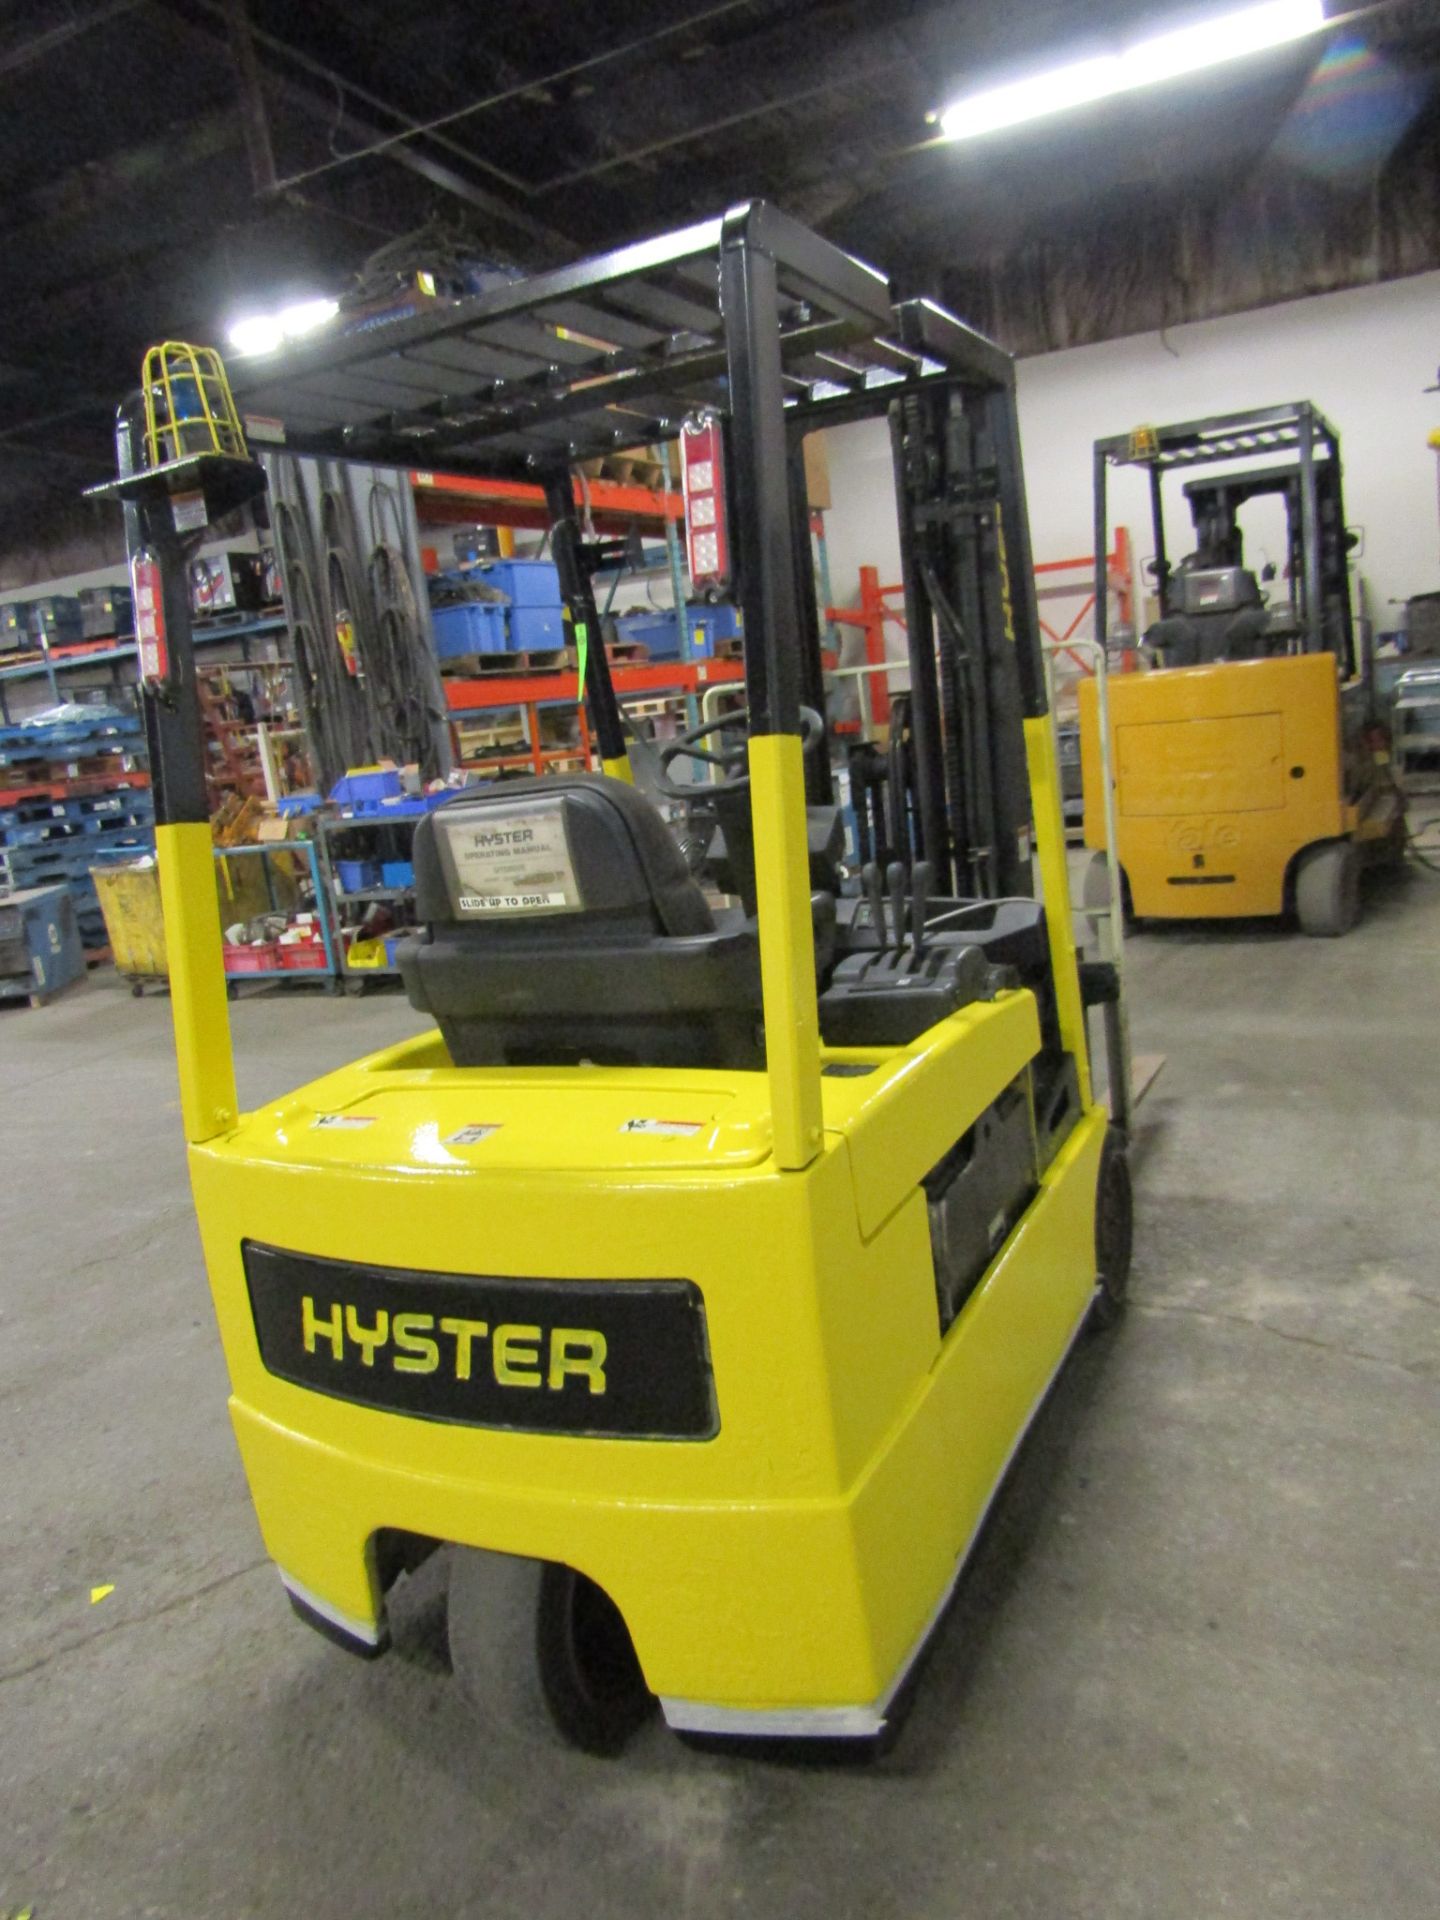 Hyster 4000lbs Capacity Forklift 3-Wheel unit - Electric with 3-stage mast & sideshift with charger - Image 2 of 3